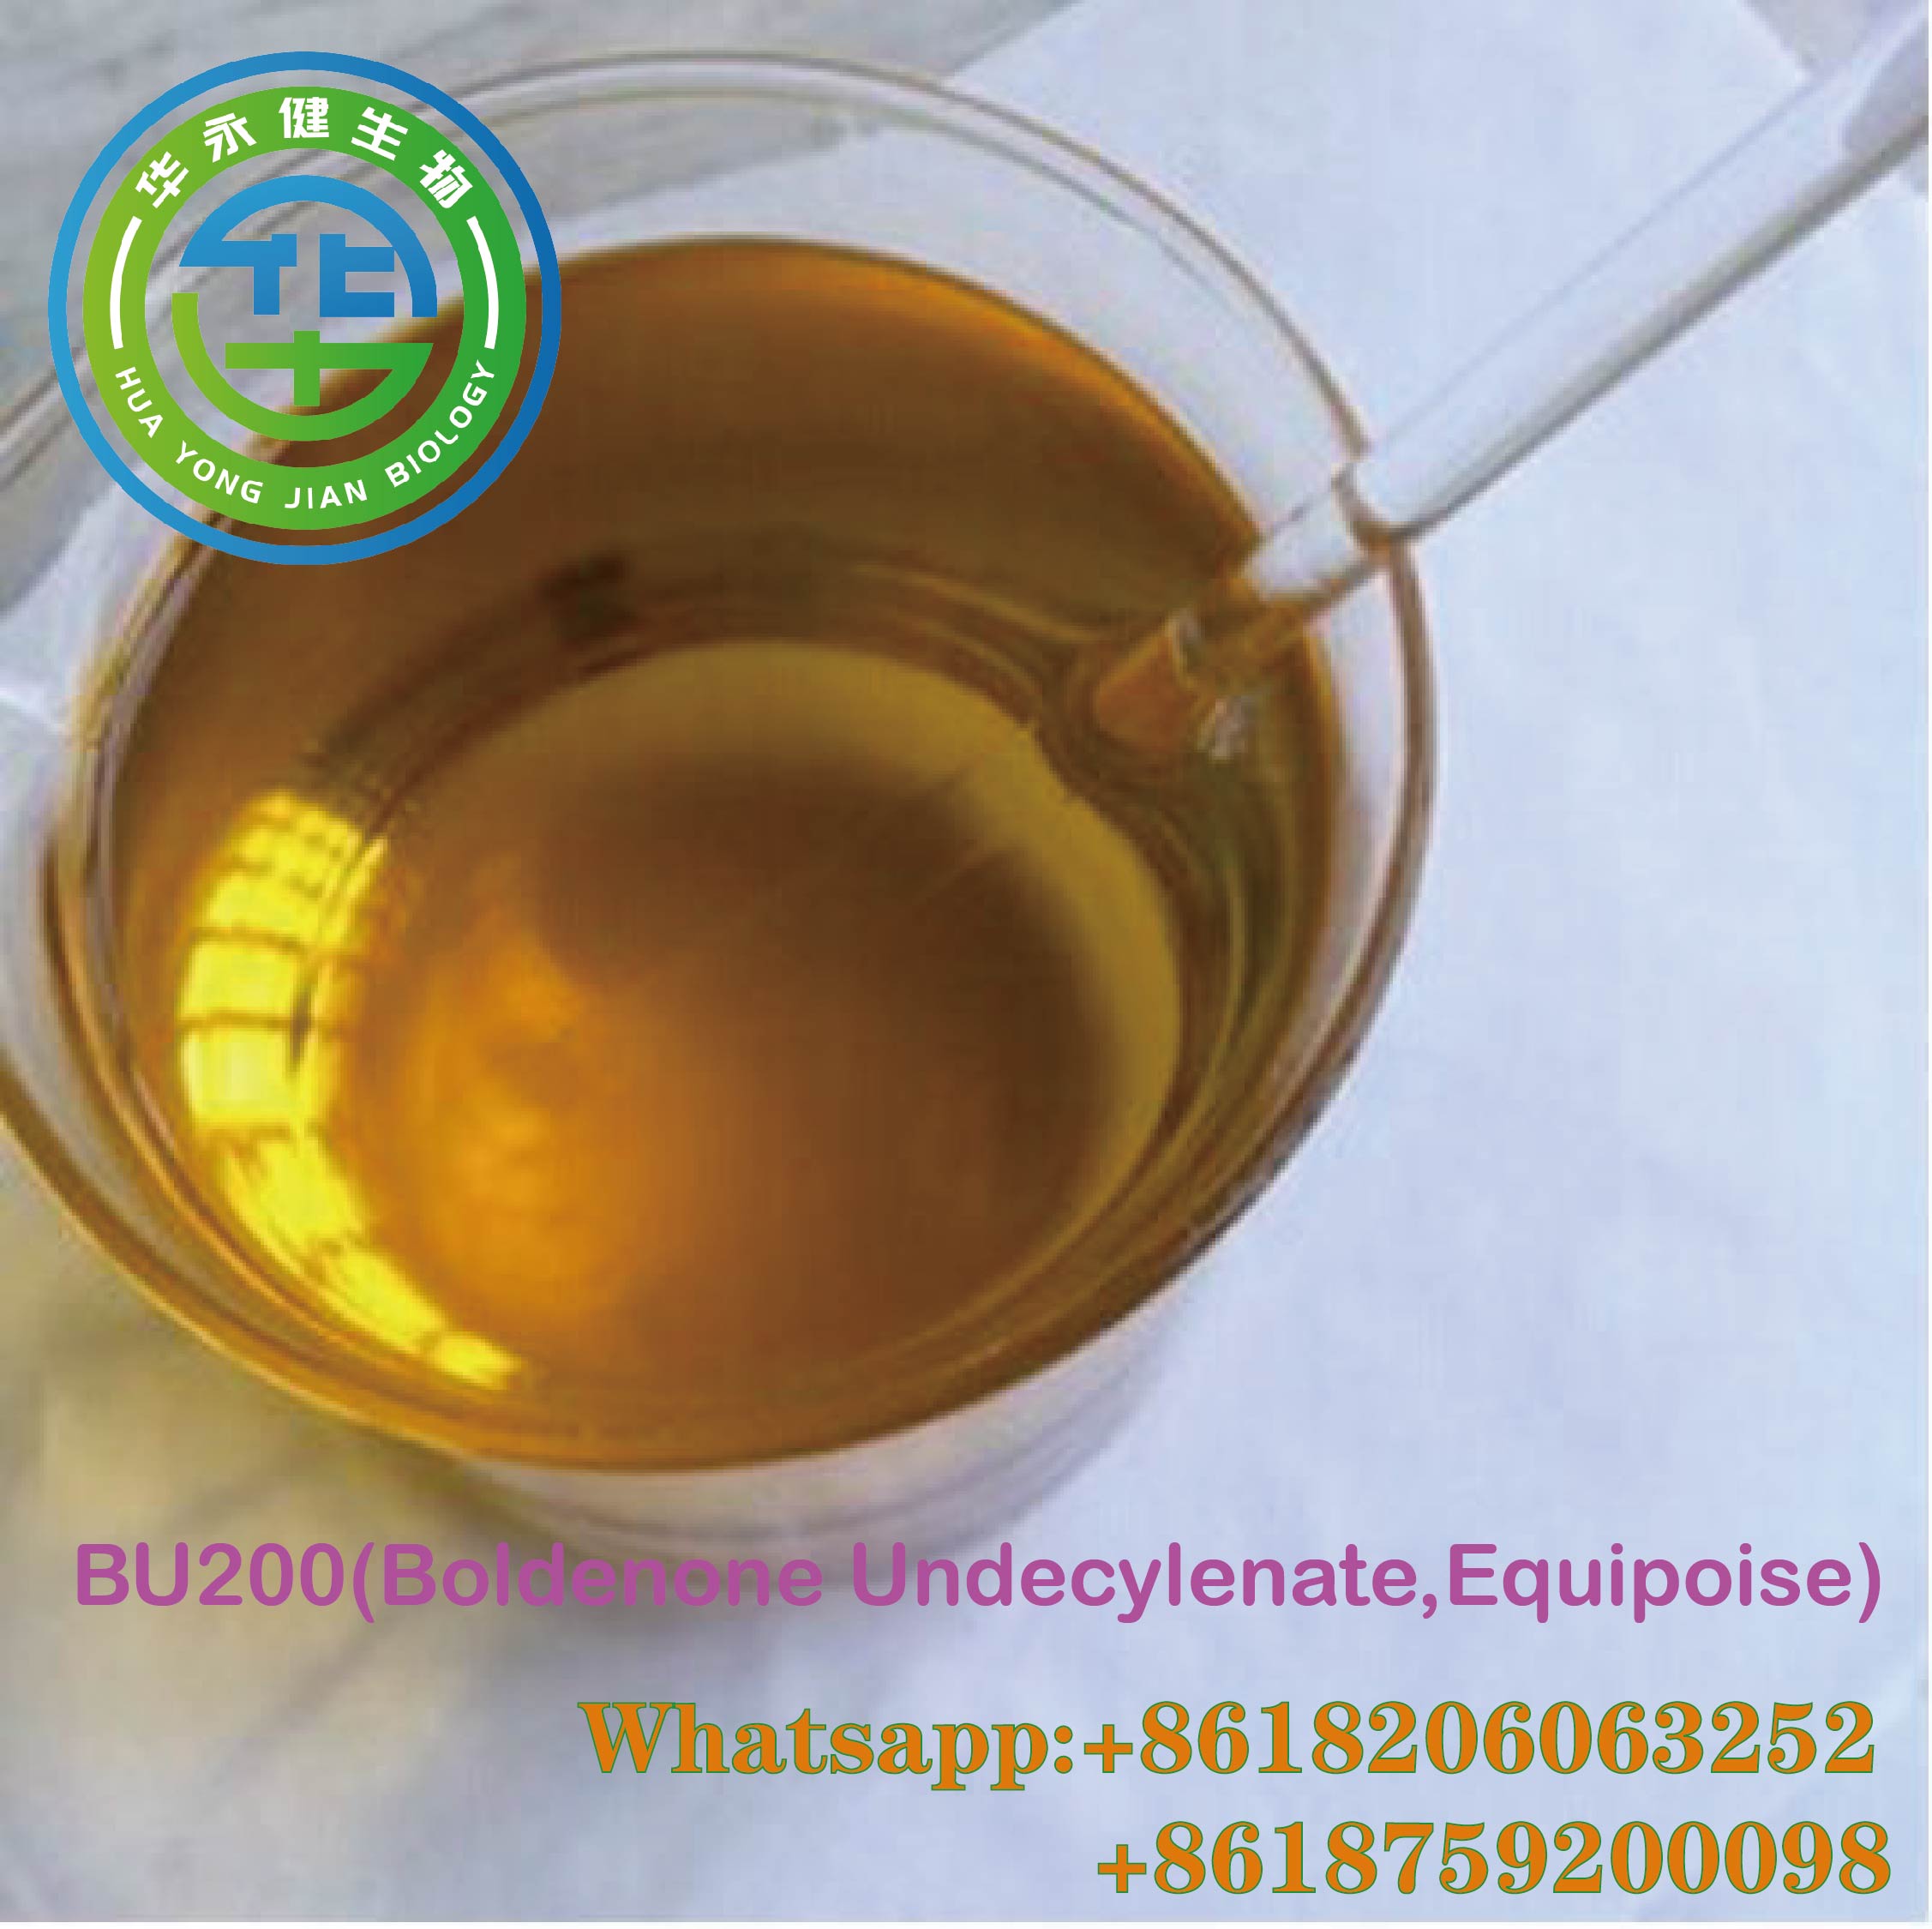 Equipoise Factory Supply Finished and Semi-Finished Steroids Oil Boldenone Undecylenate 200mg/ml Steroids Oil High Quality Safe Shipping